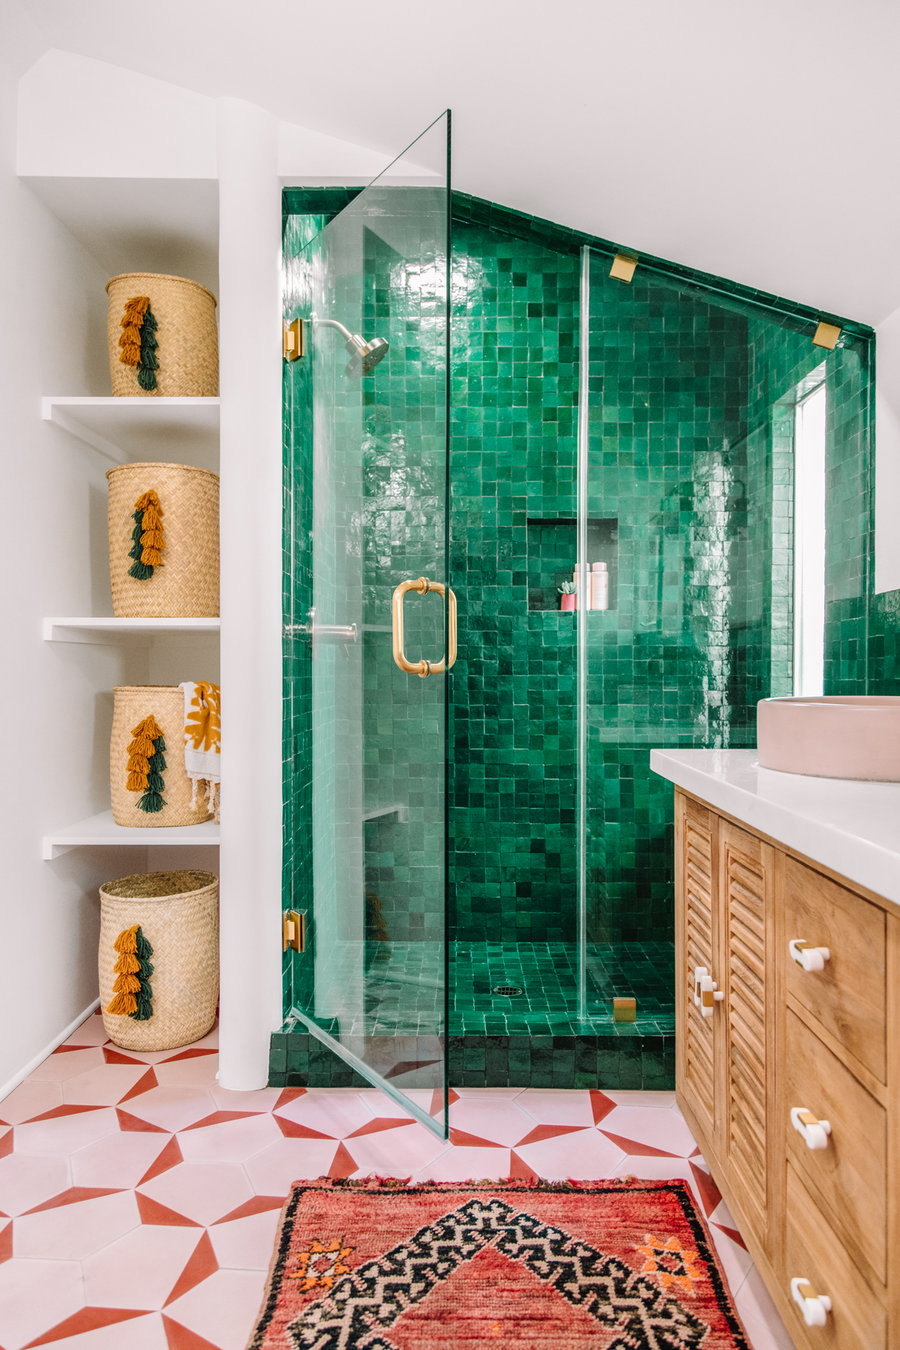 Bold bathroom tiles like these make a big splash for a moment, but many people find themselves craving a return to more neutral hues before long.